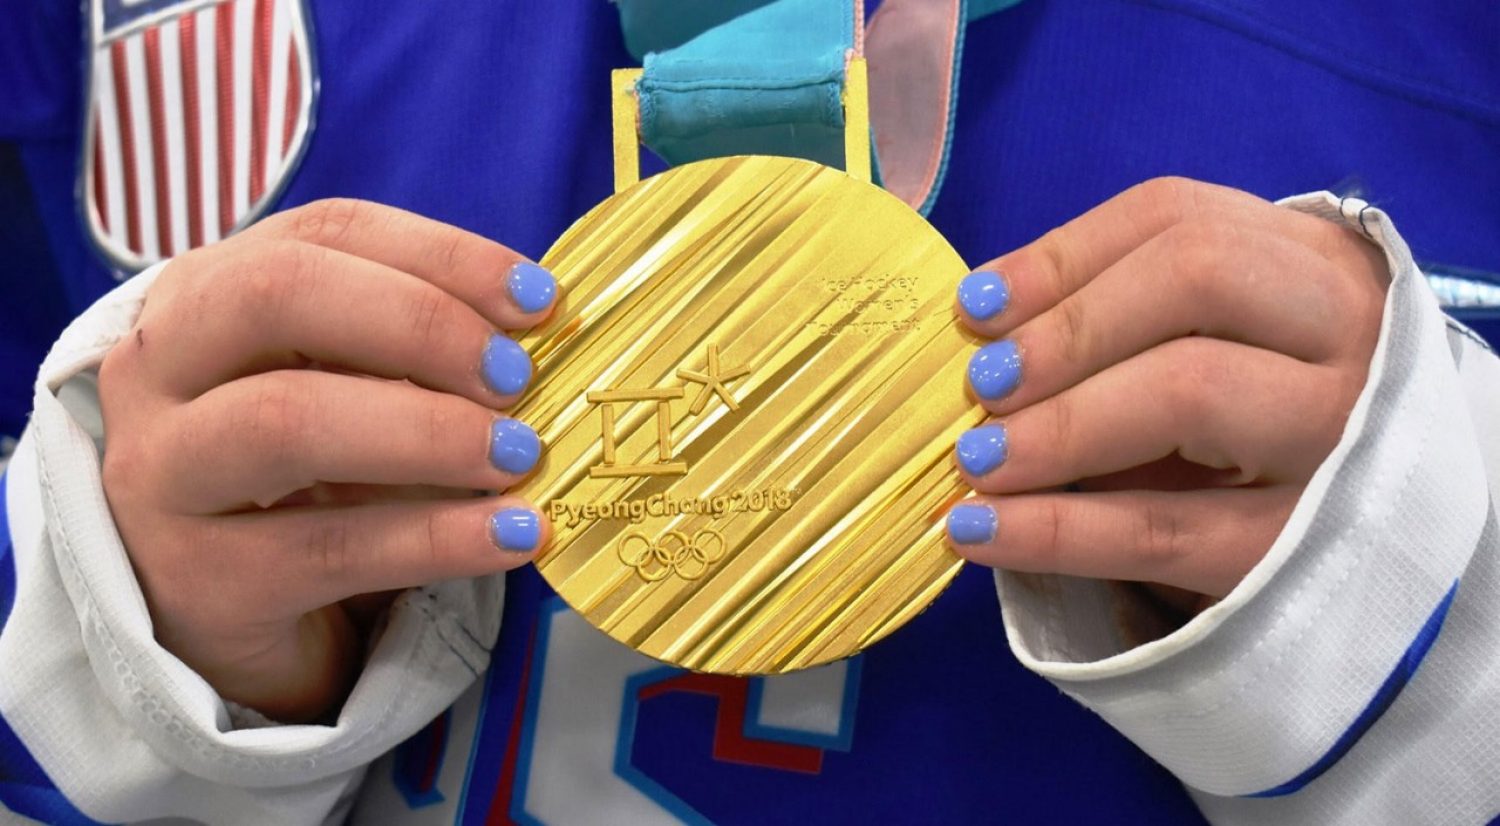 An Olympic gold medal